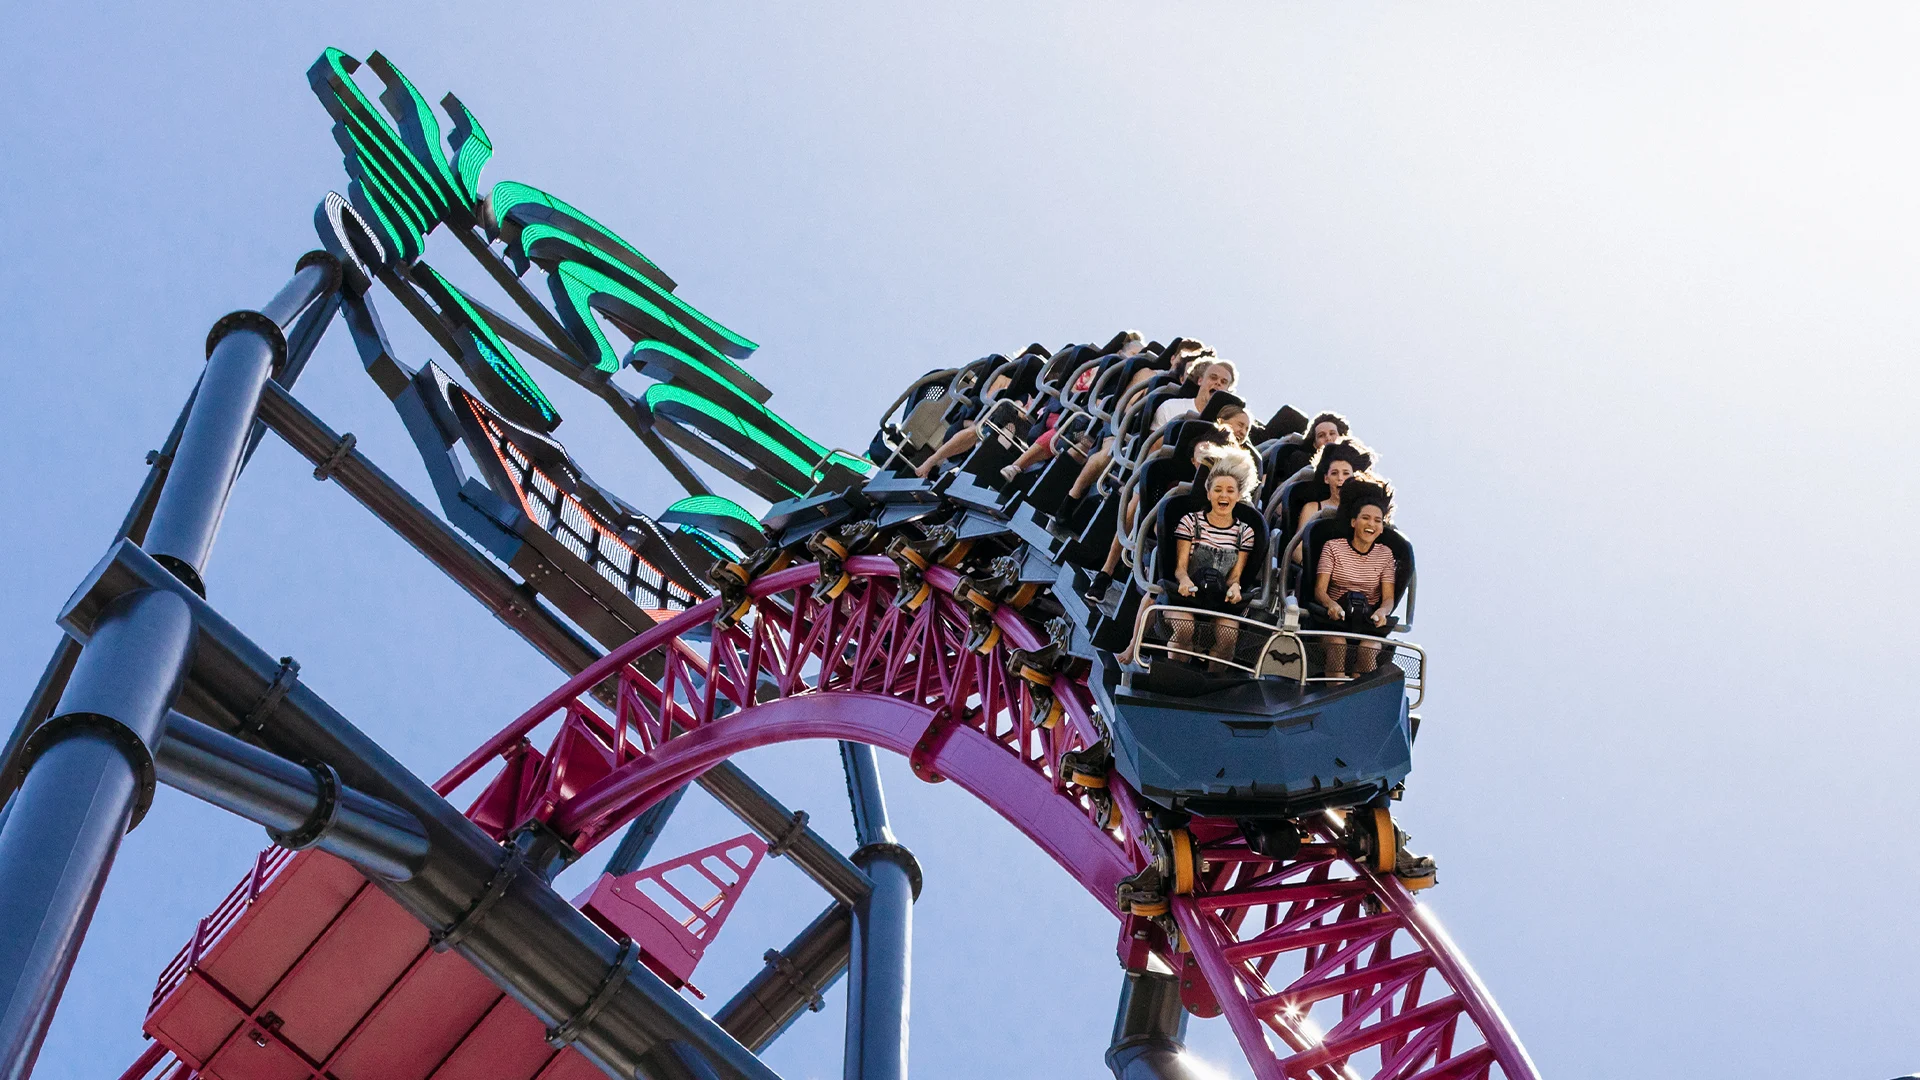 Thrilled riders descending down the main hill on the DC Rivals HyperCoaster at Warner Bros. Movie World, with exhilarating speed and excitement captured in the moment